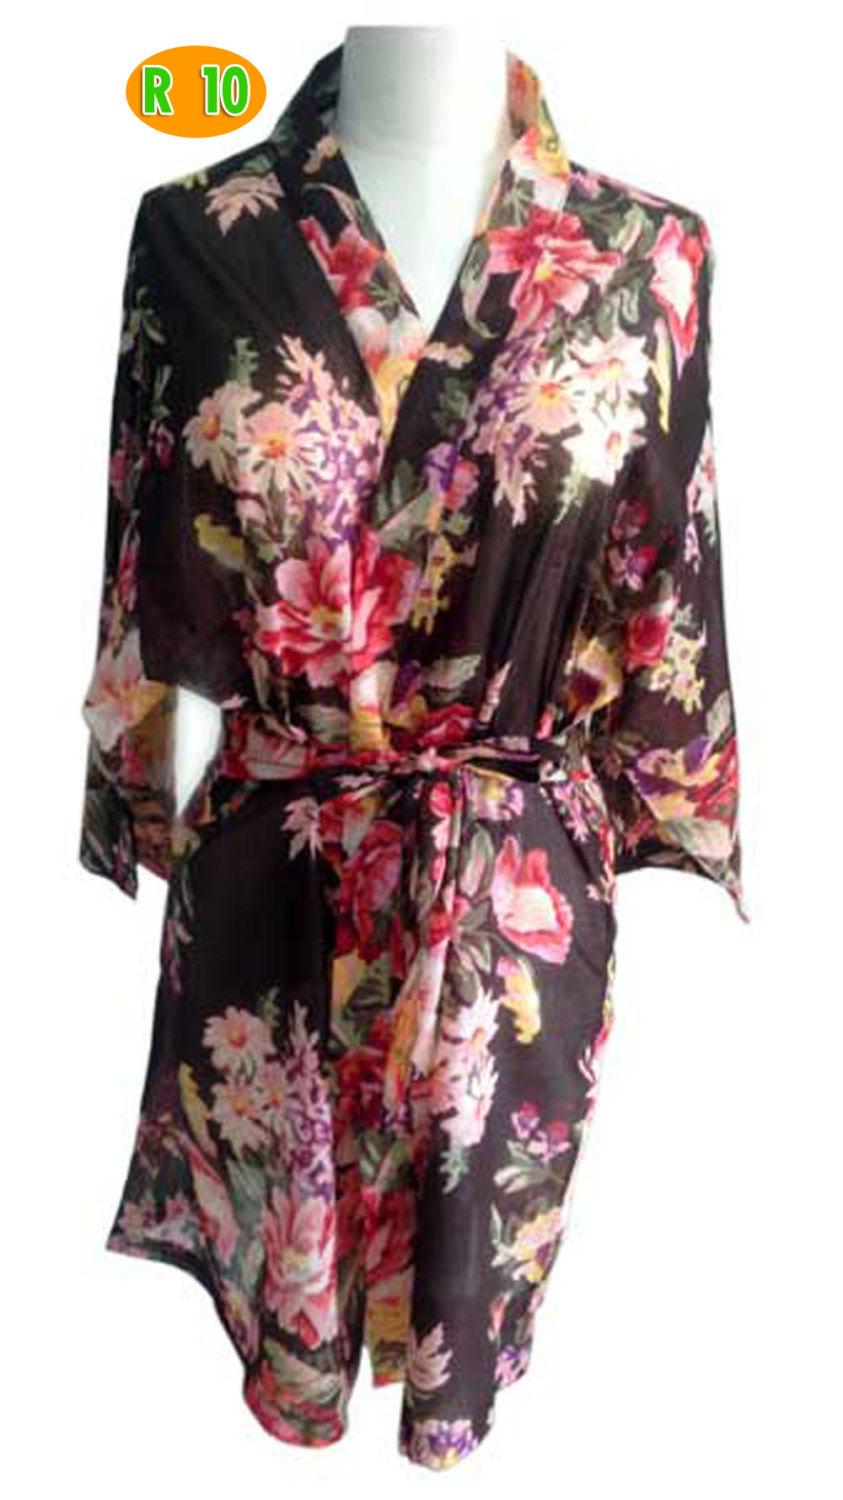 Свадьба - Black Floral Bridesmaids Robes. Kimono Robes. Bridesmaids gifts. Getting ready robes. Bridal Party Robes. Floral Robes. Wedding Party Robes